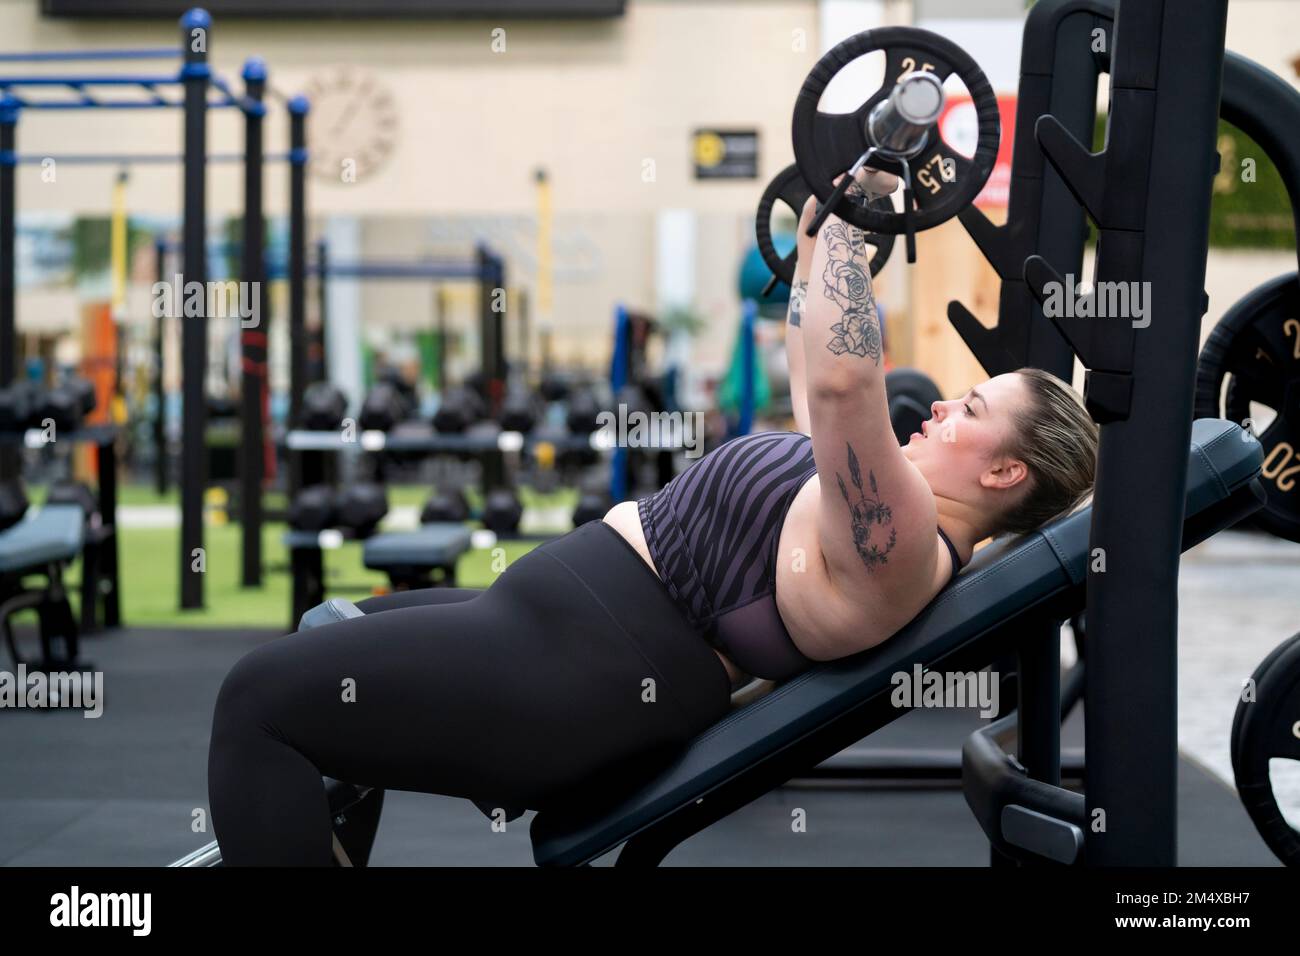 Chest press workout. Young woman exercising in gym Stock Photo - Alamy